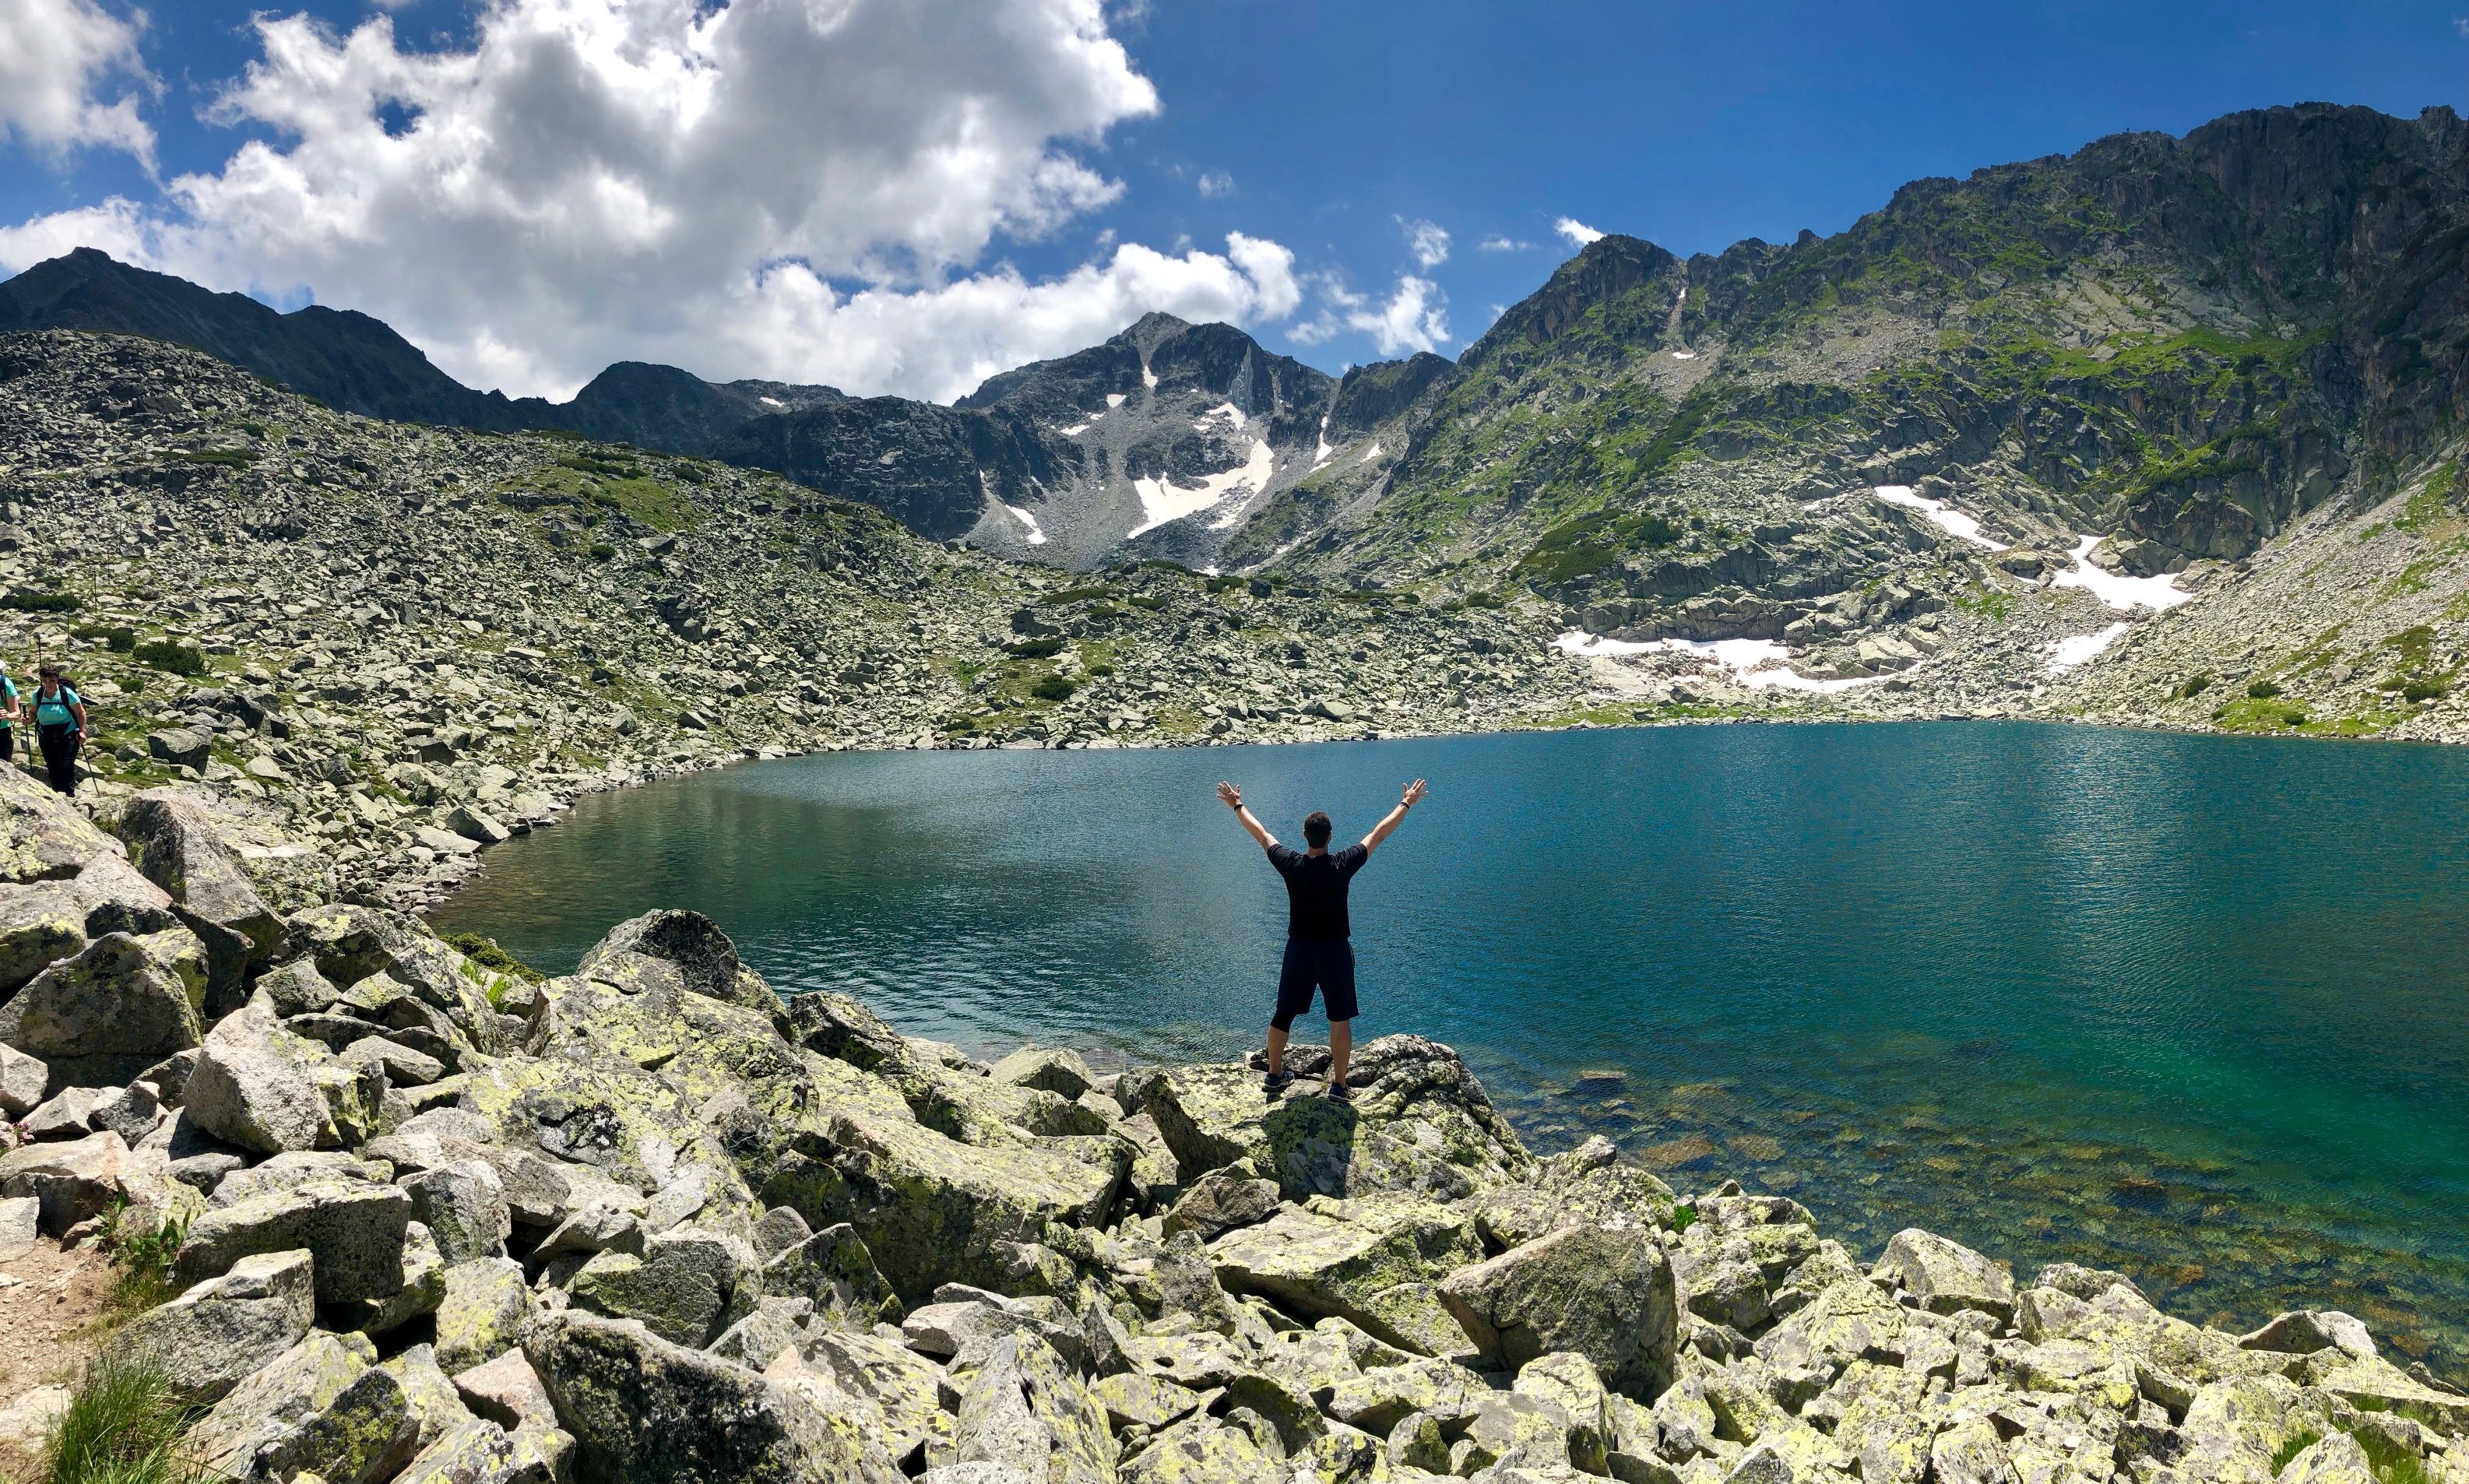 Caption: A photo of Google Moderator @FelipePk with his hands raised and facing a clear-water lake in Rila National Park, Bulgaria, with Musala Peak in the background. (Local Guide @FelipePk)